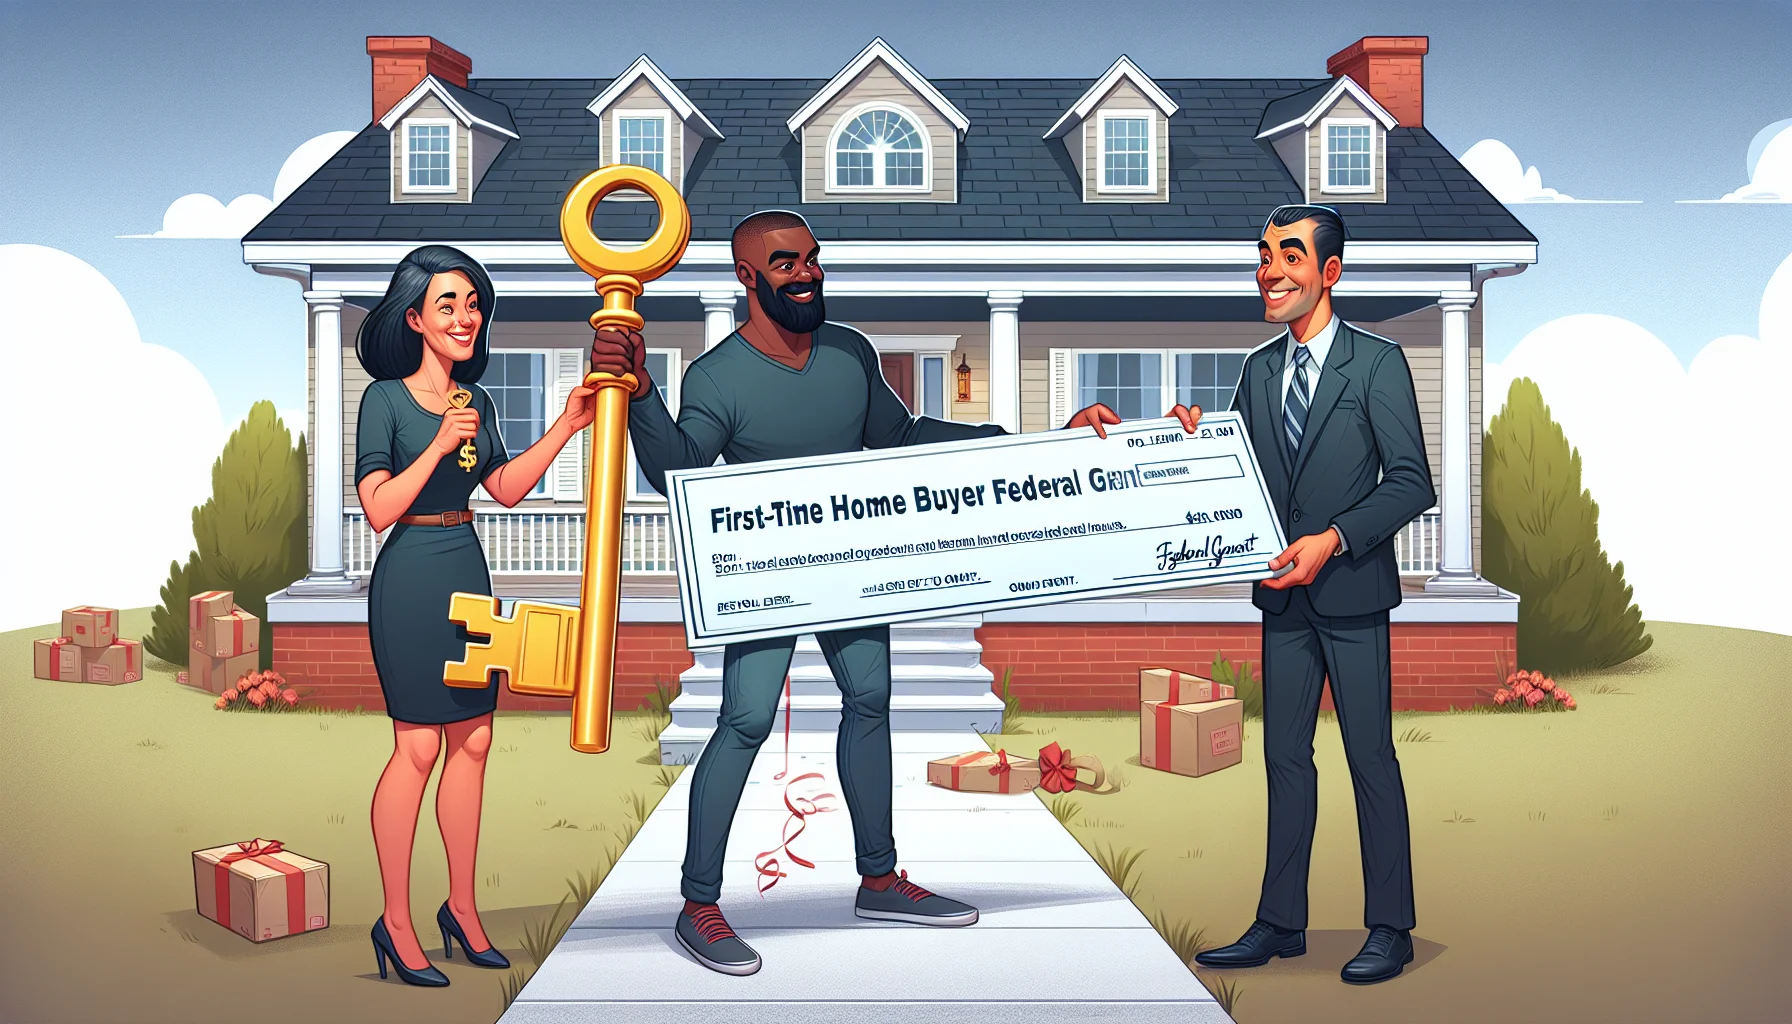 Create a humorous and realistic illustration depicting a perfect scenario involving first-time home buyer federal grants. The image could present a Caucasian woman and a Black man holding giant golden keys in their hands, standing in front of a beautiful, newly-purchased house, with a banner in the background that reads 'First-time Home Buyer Federal Grants'. A man, who represents a real estate agent, possibly of Middle-Eastern descent, is handing them a big check, with the words 'Federal Grant' written on it. The atmosphere should be light-hearted and celebratory, possibly with balloons and confetti floating around.